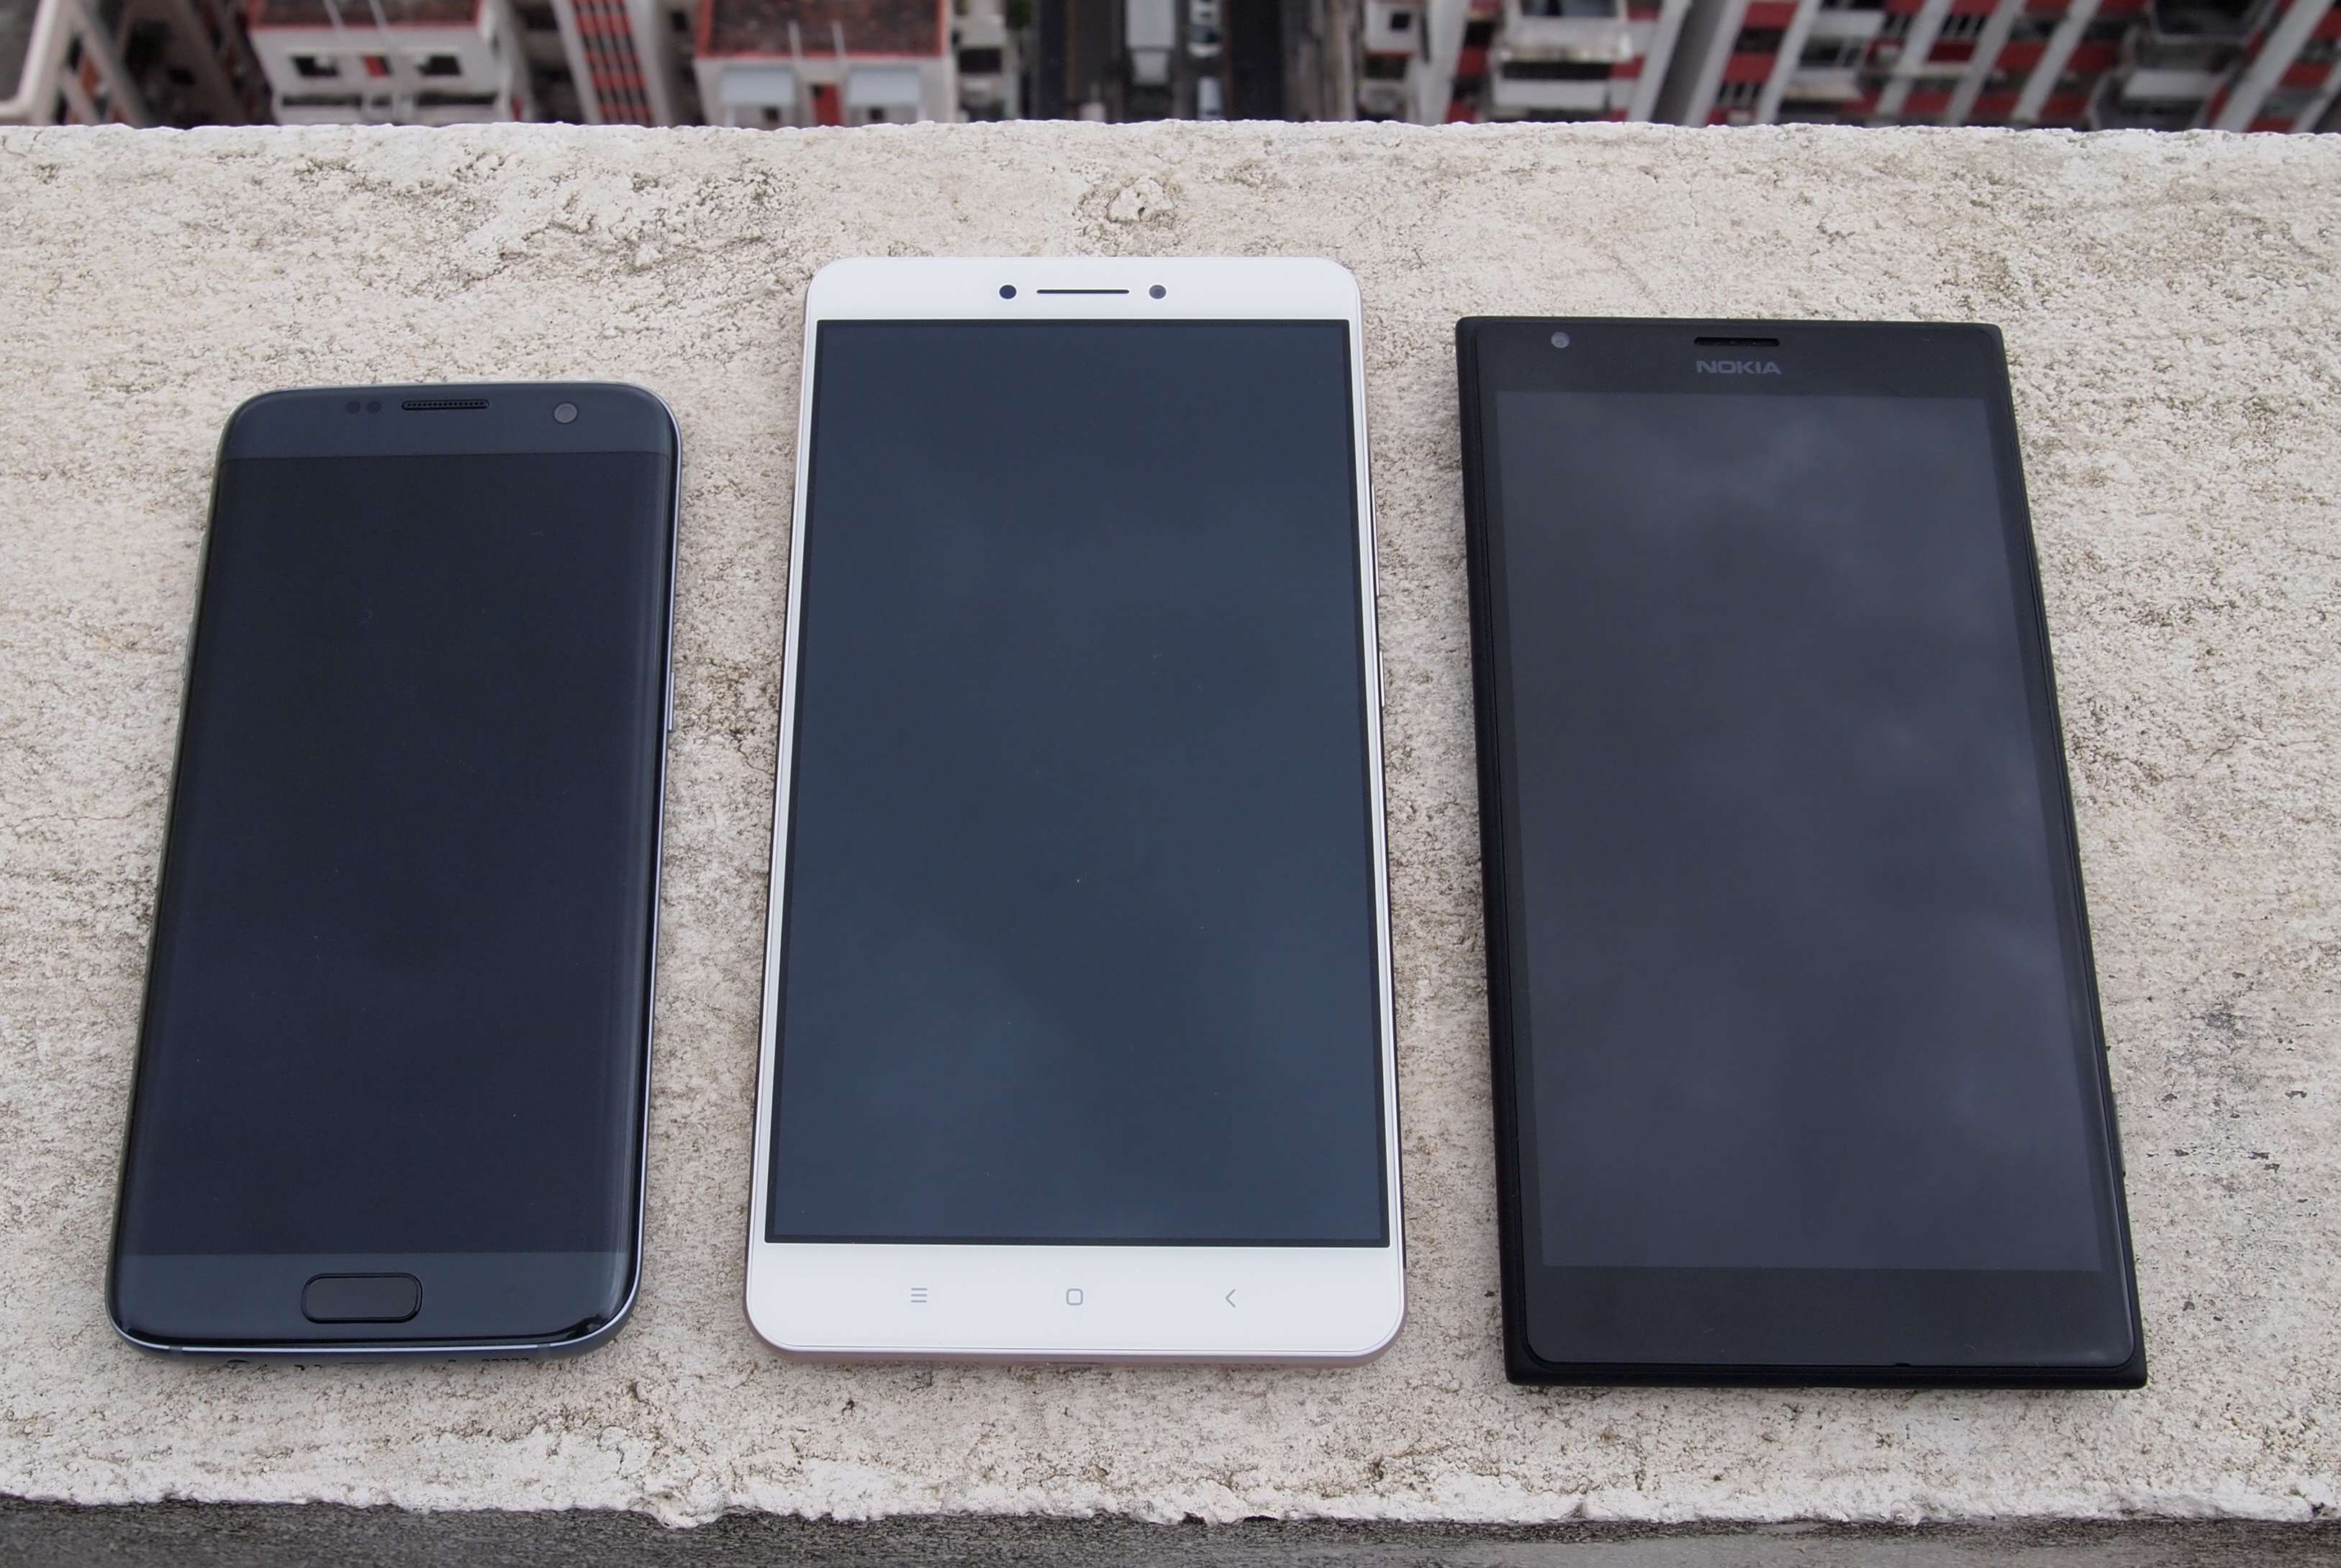 Smartphone size comparison: (from left to right) Galaxy S7 Edge, Xiaomi Mi Max and the Nokia 1520. Photo: Eric Wong